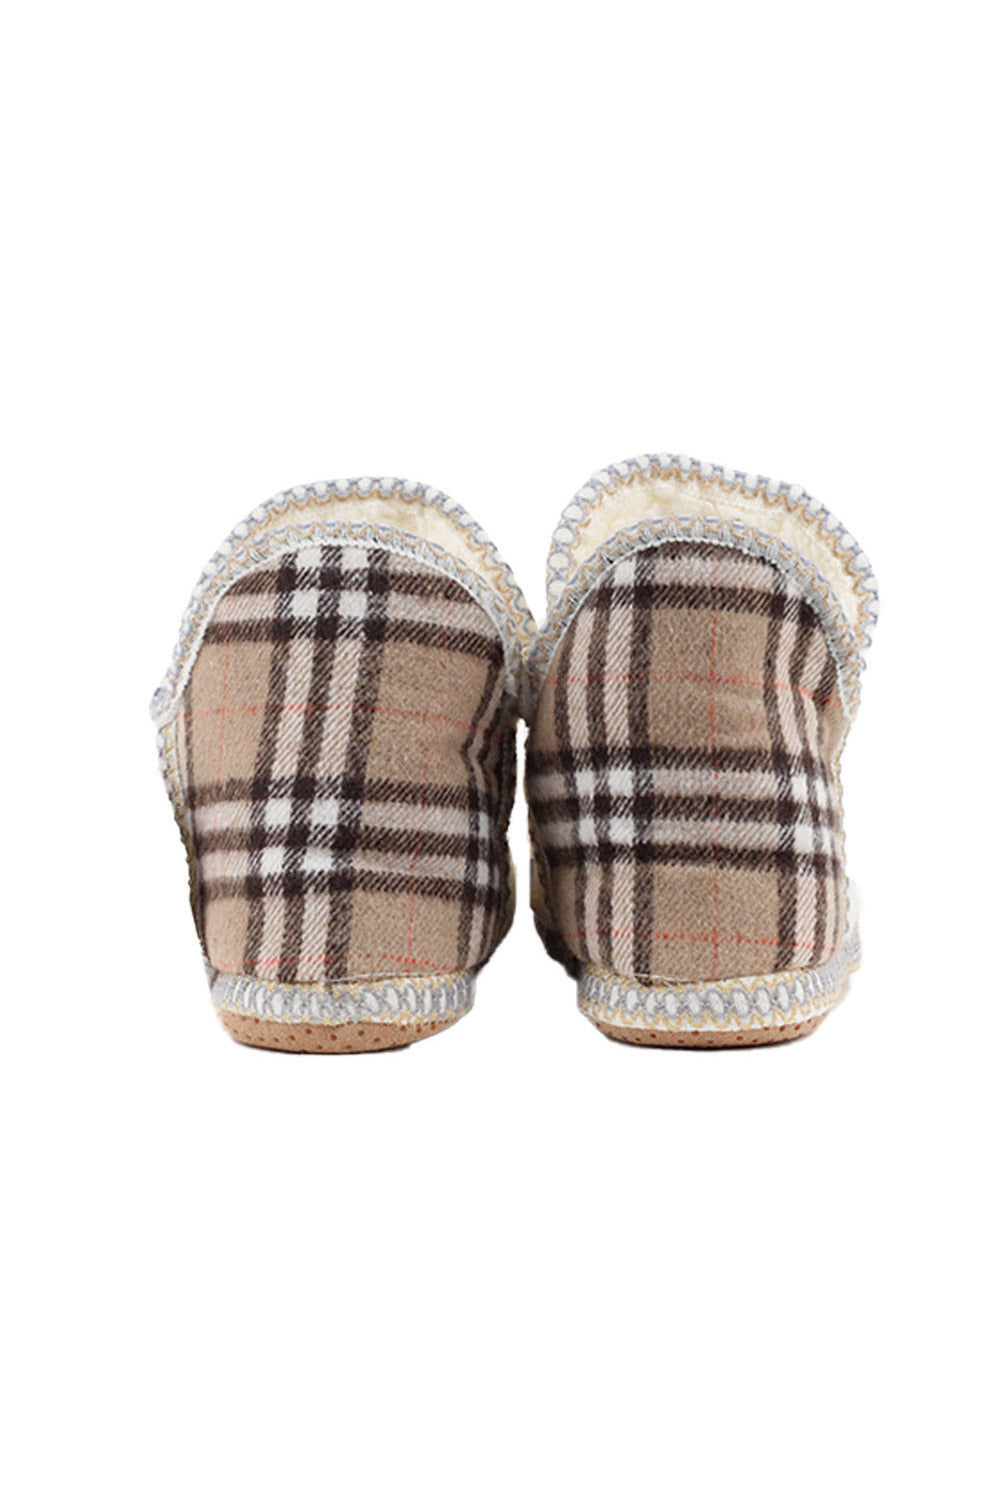 Cable Knit and Beige Tartan Home Booties with Tassels Ribbon